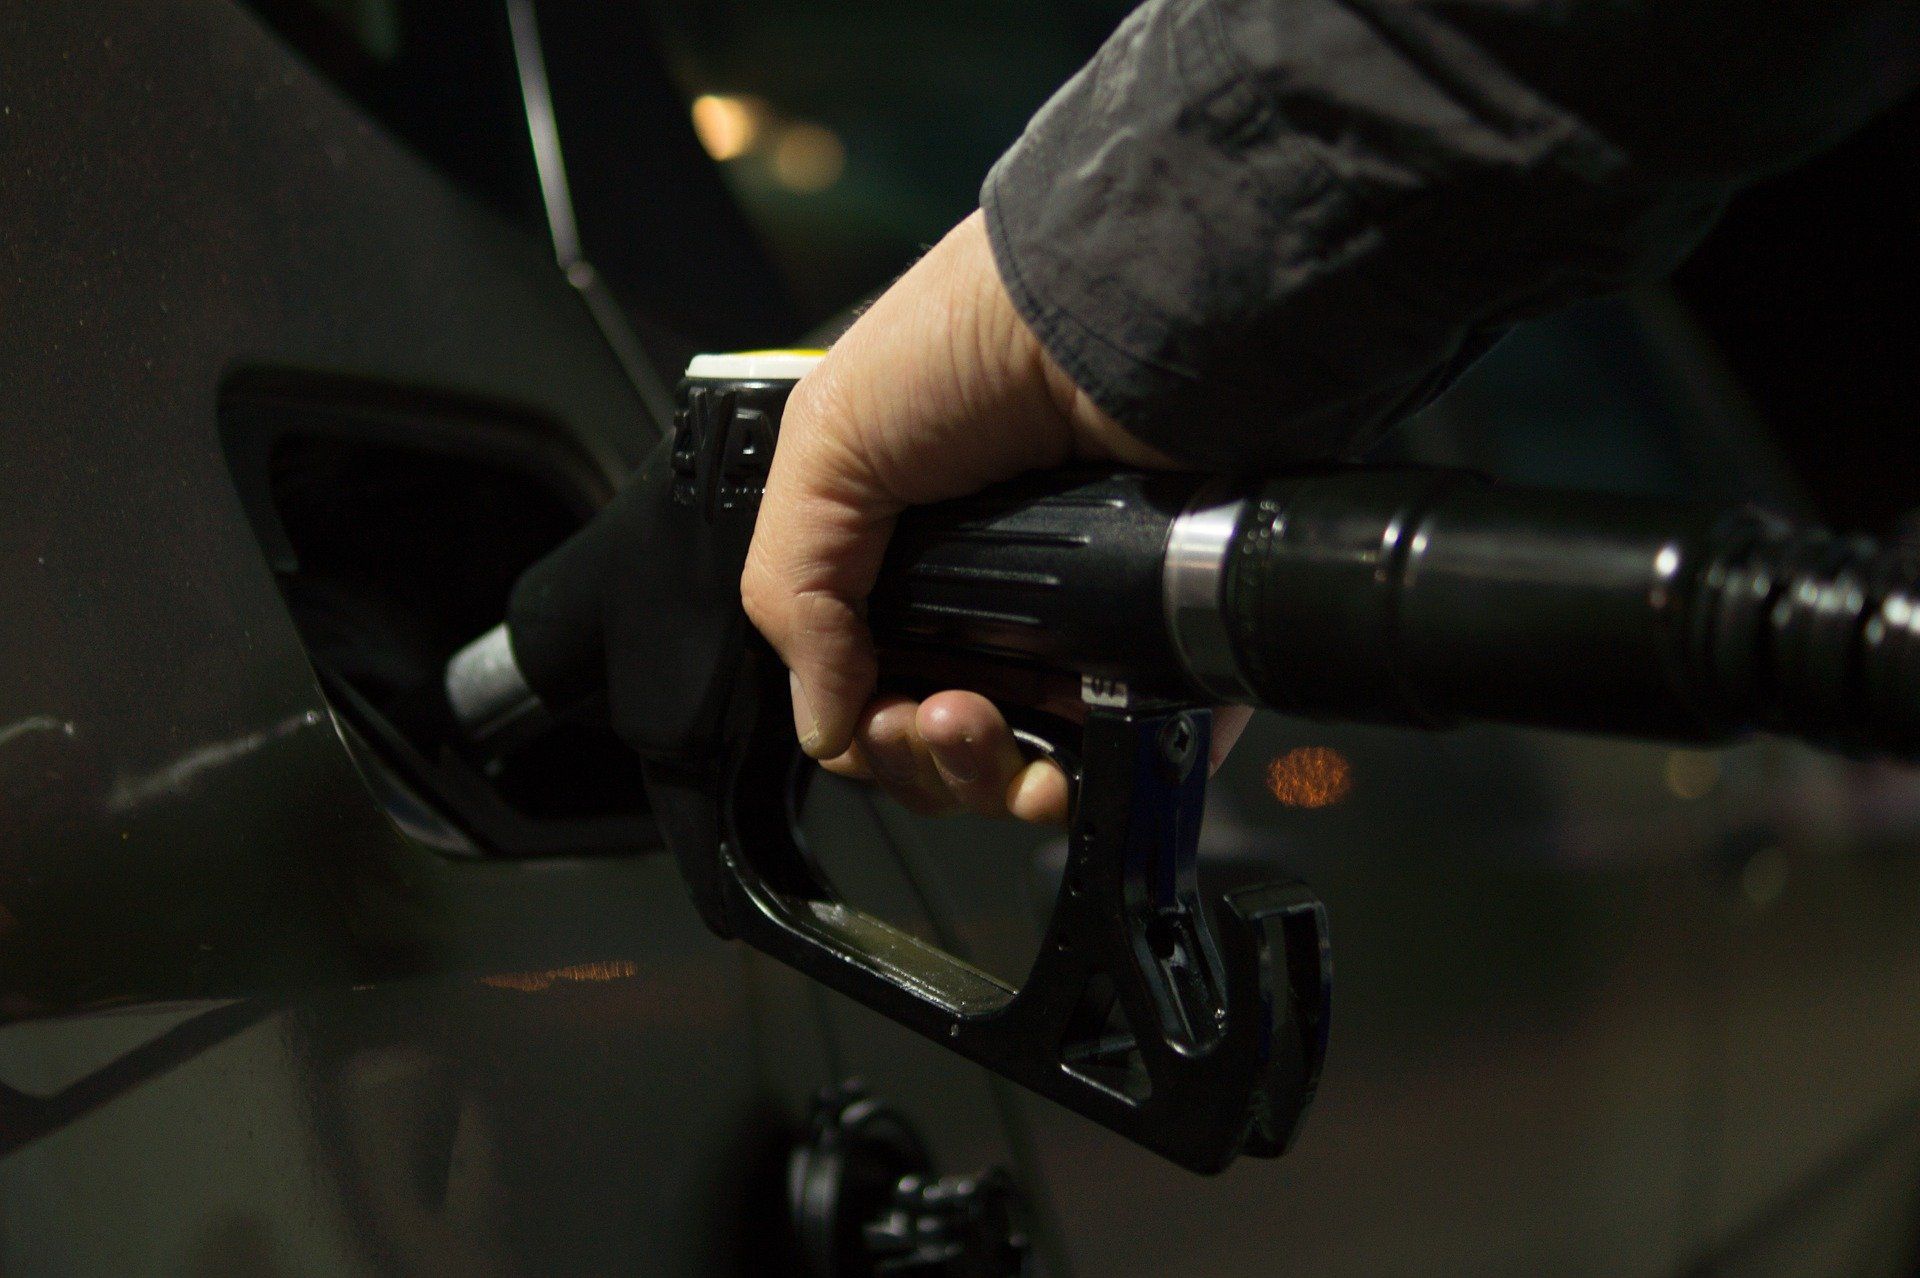 Fuel prices: Petrol priced at Rs 95.41, diesel Rs 86.67 in Delhi on March 16, 2022